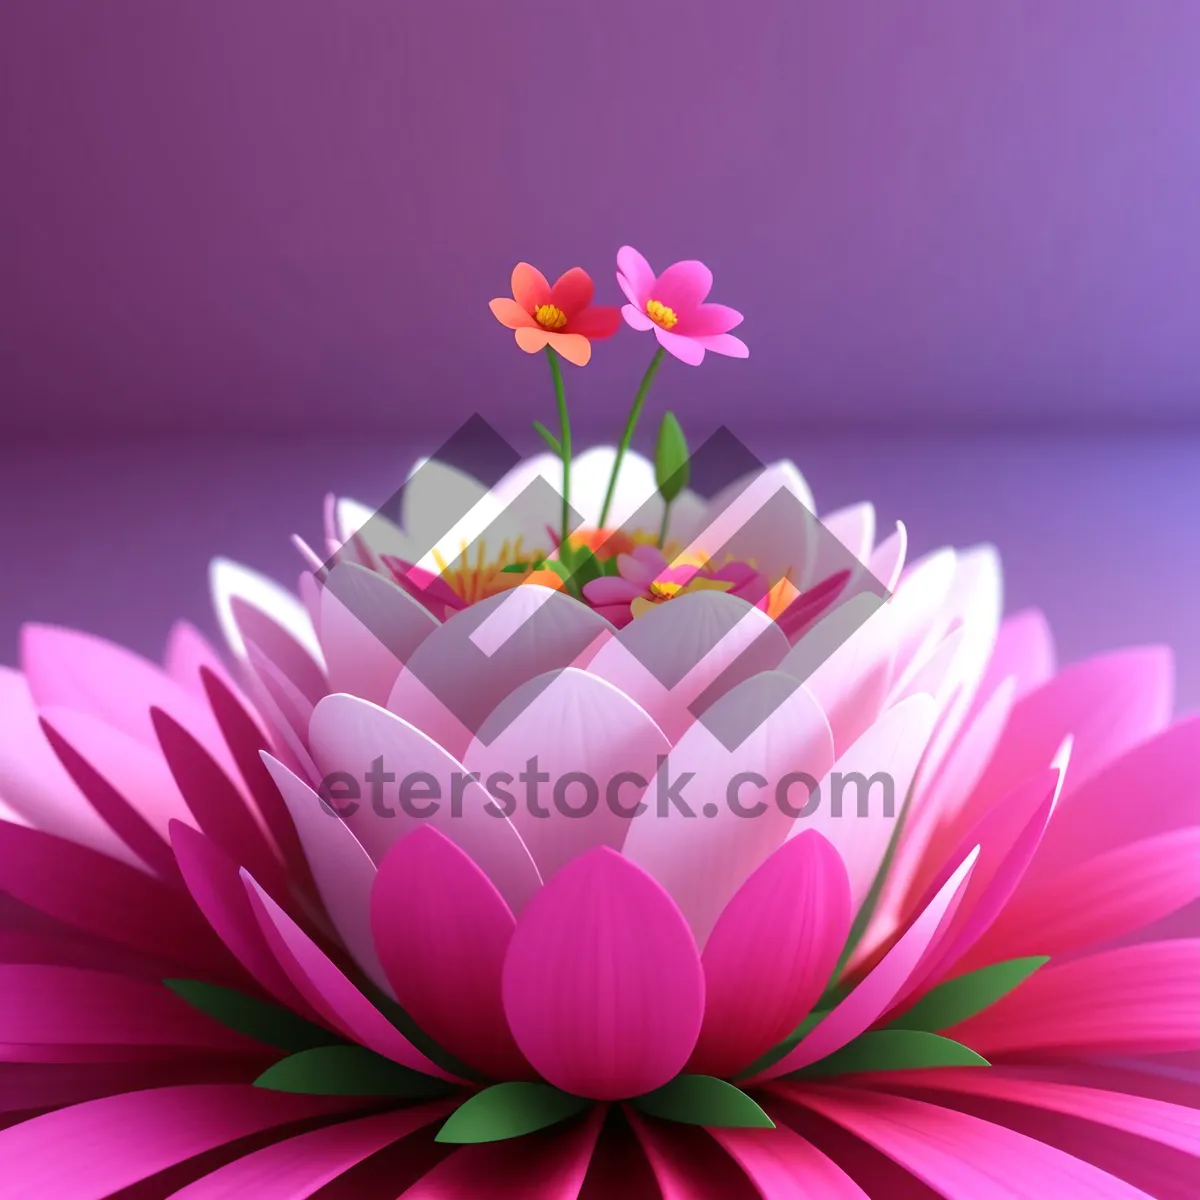 Picture of Bright Pink Lotus Blossom in Summer